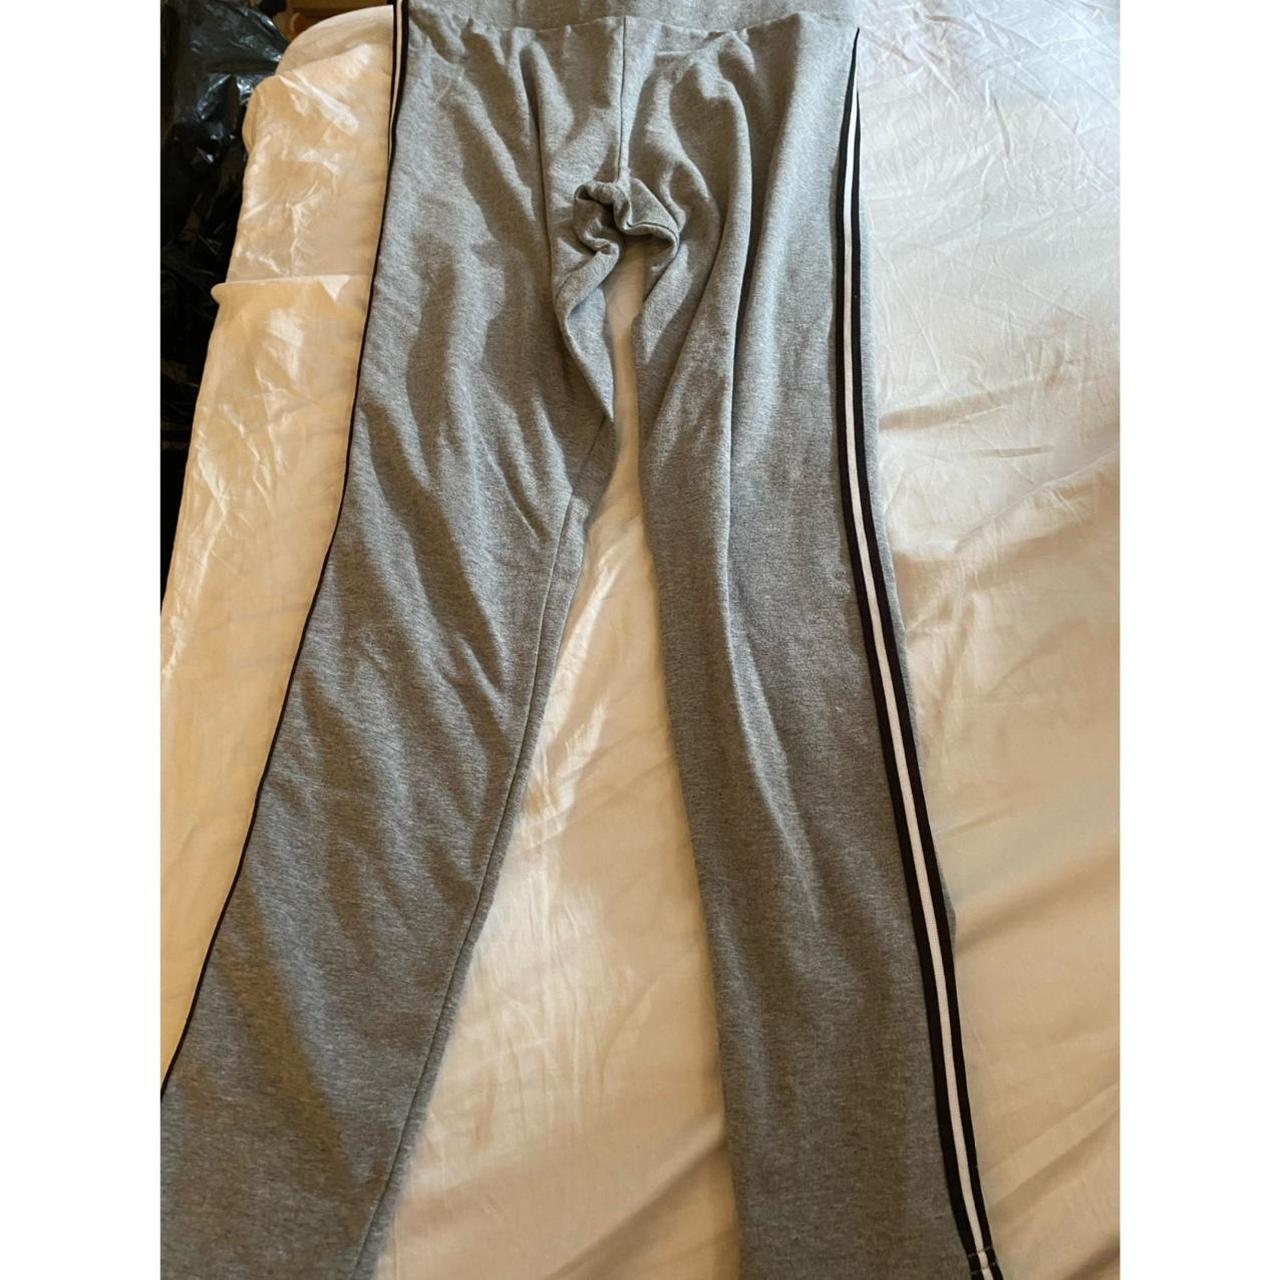 Primark Women's Grey and Black Joggers-tracksuits | Depop